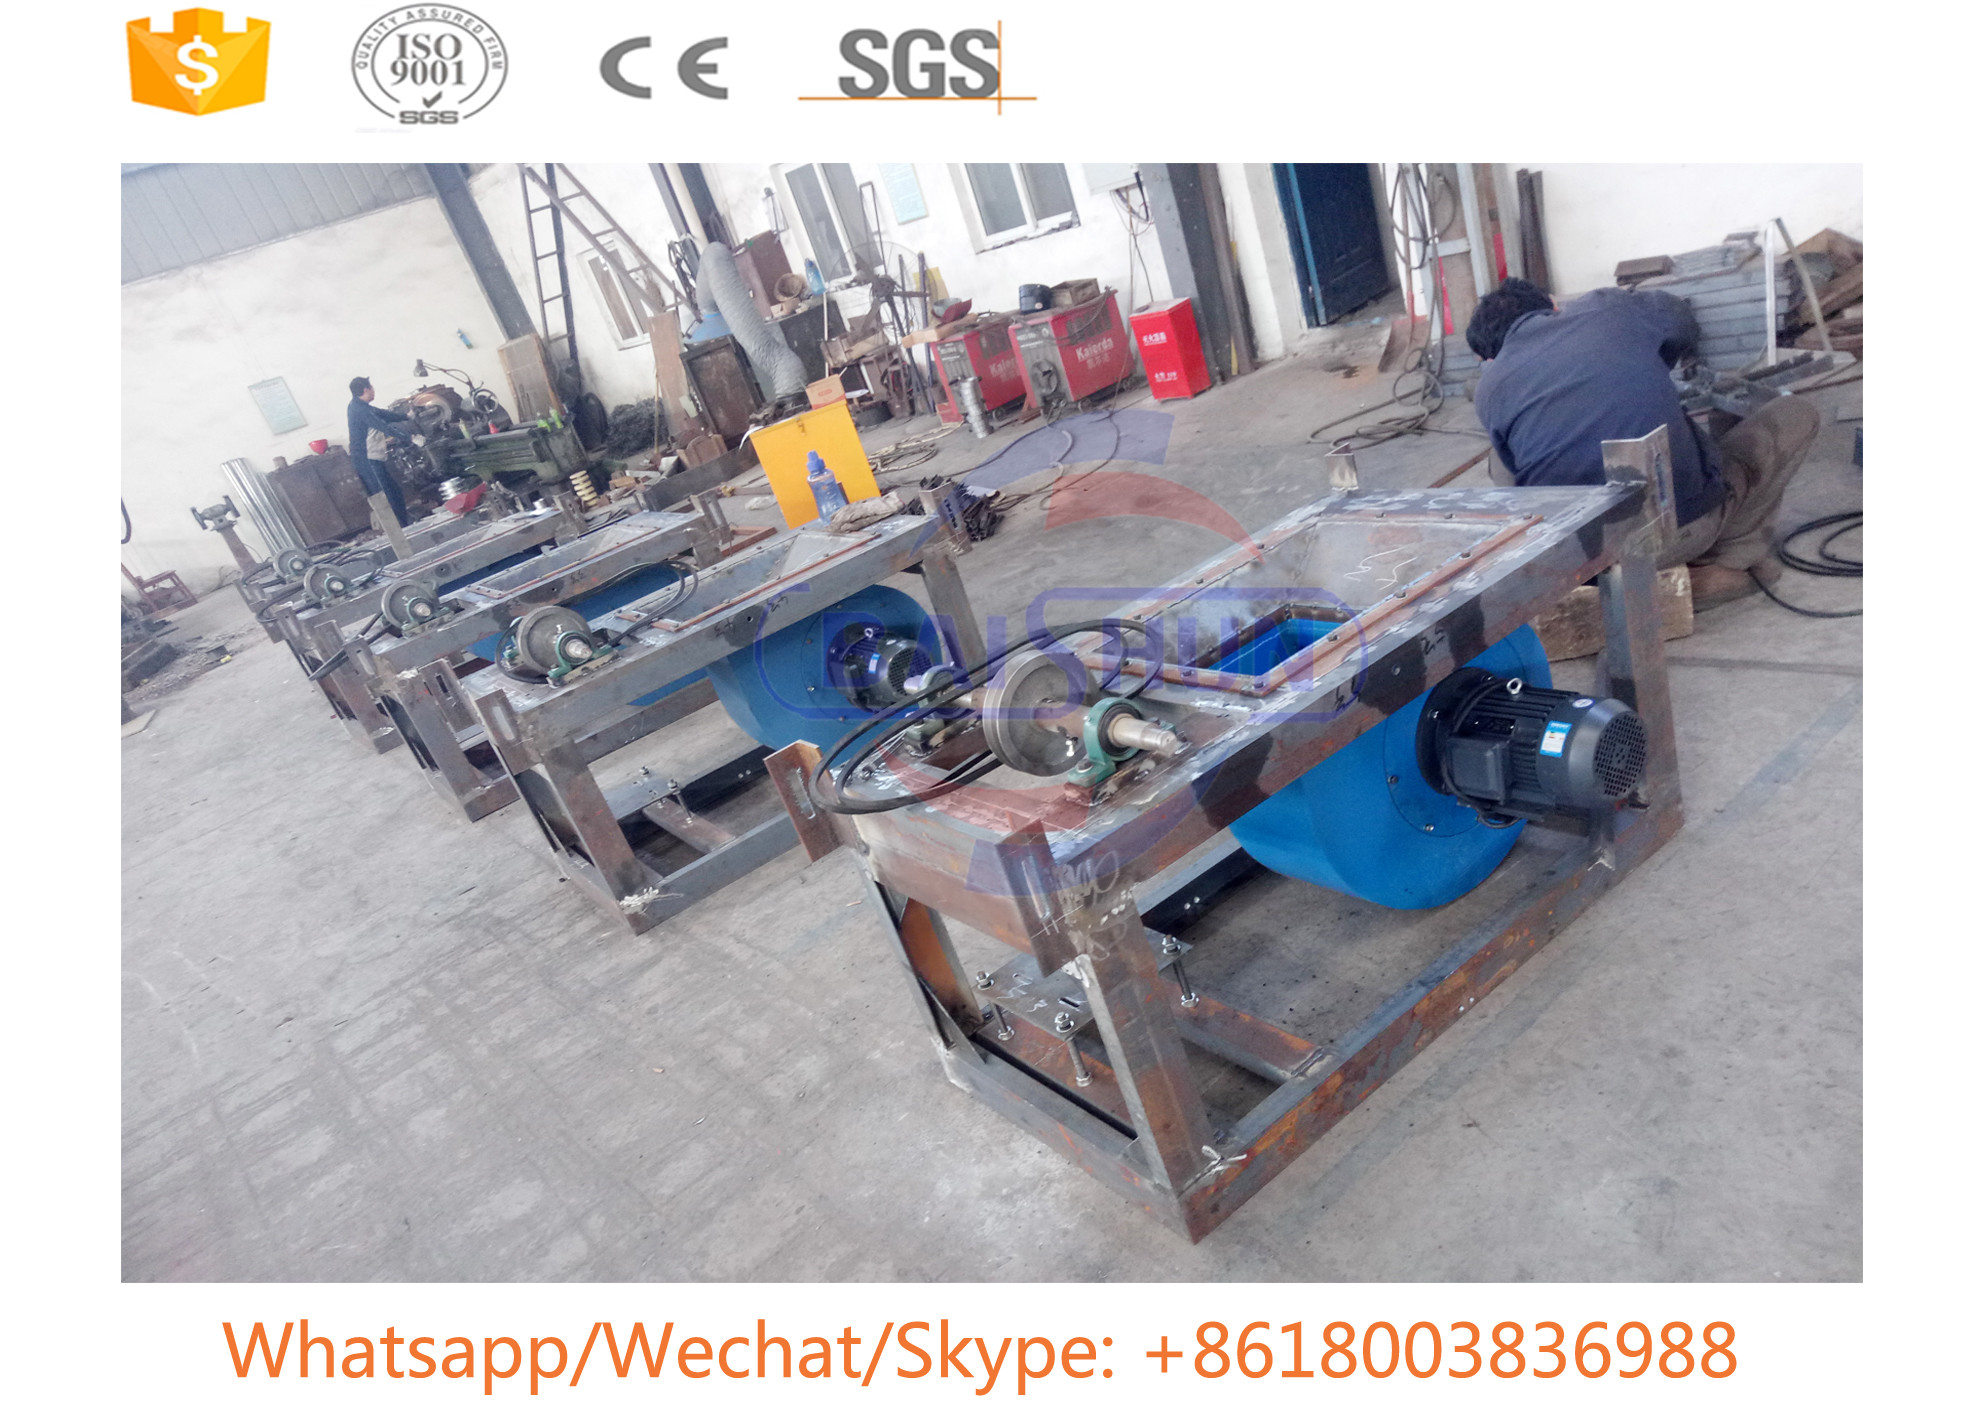  Granulator Drawing Scrap Copper Wire Recycling Machine With Removable Hopper Crusher Manufactures